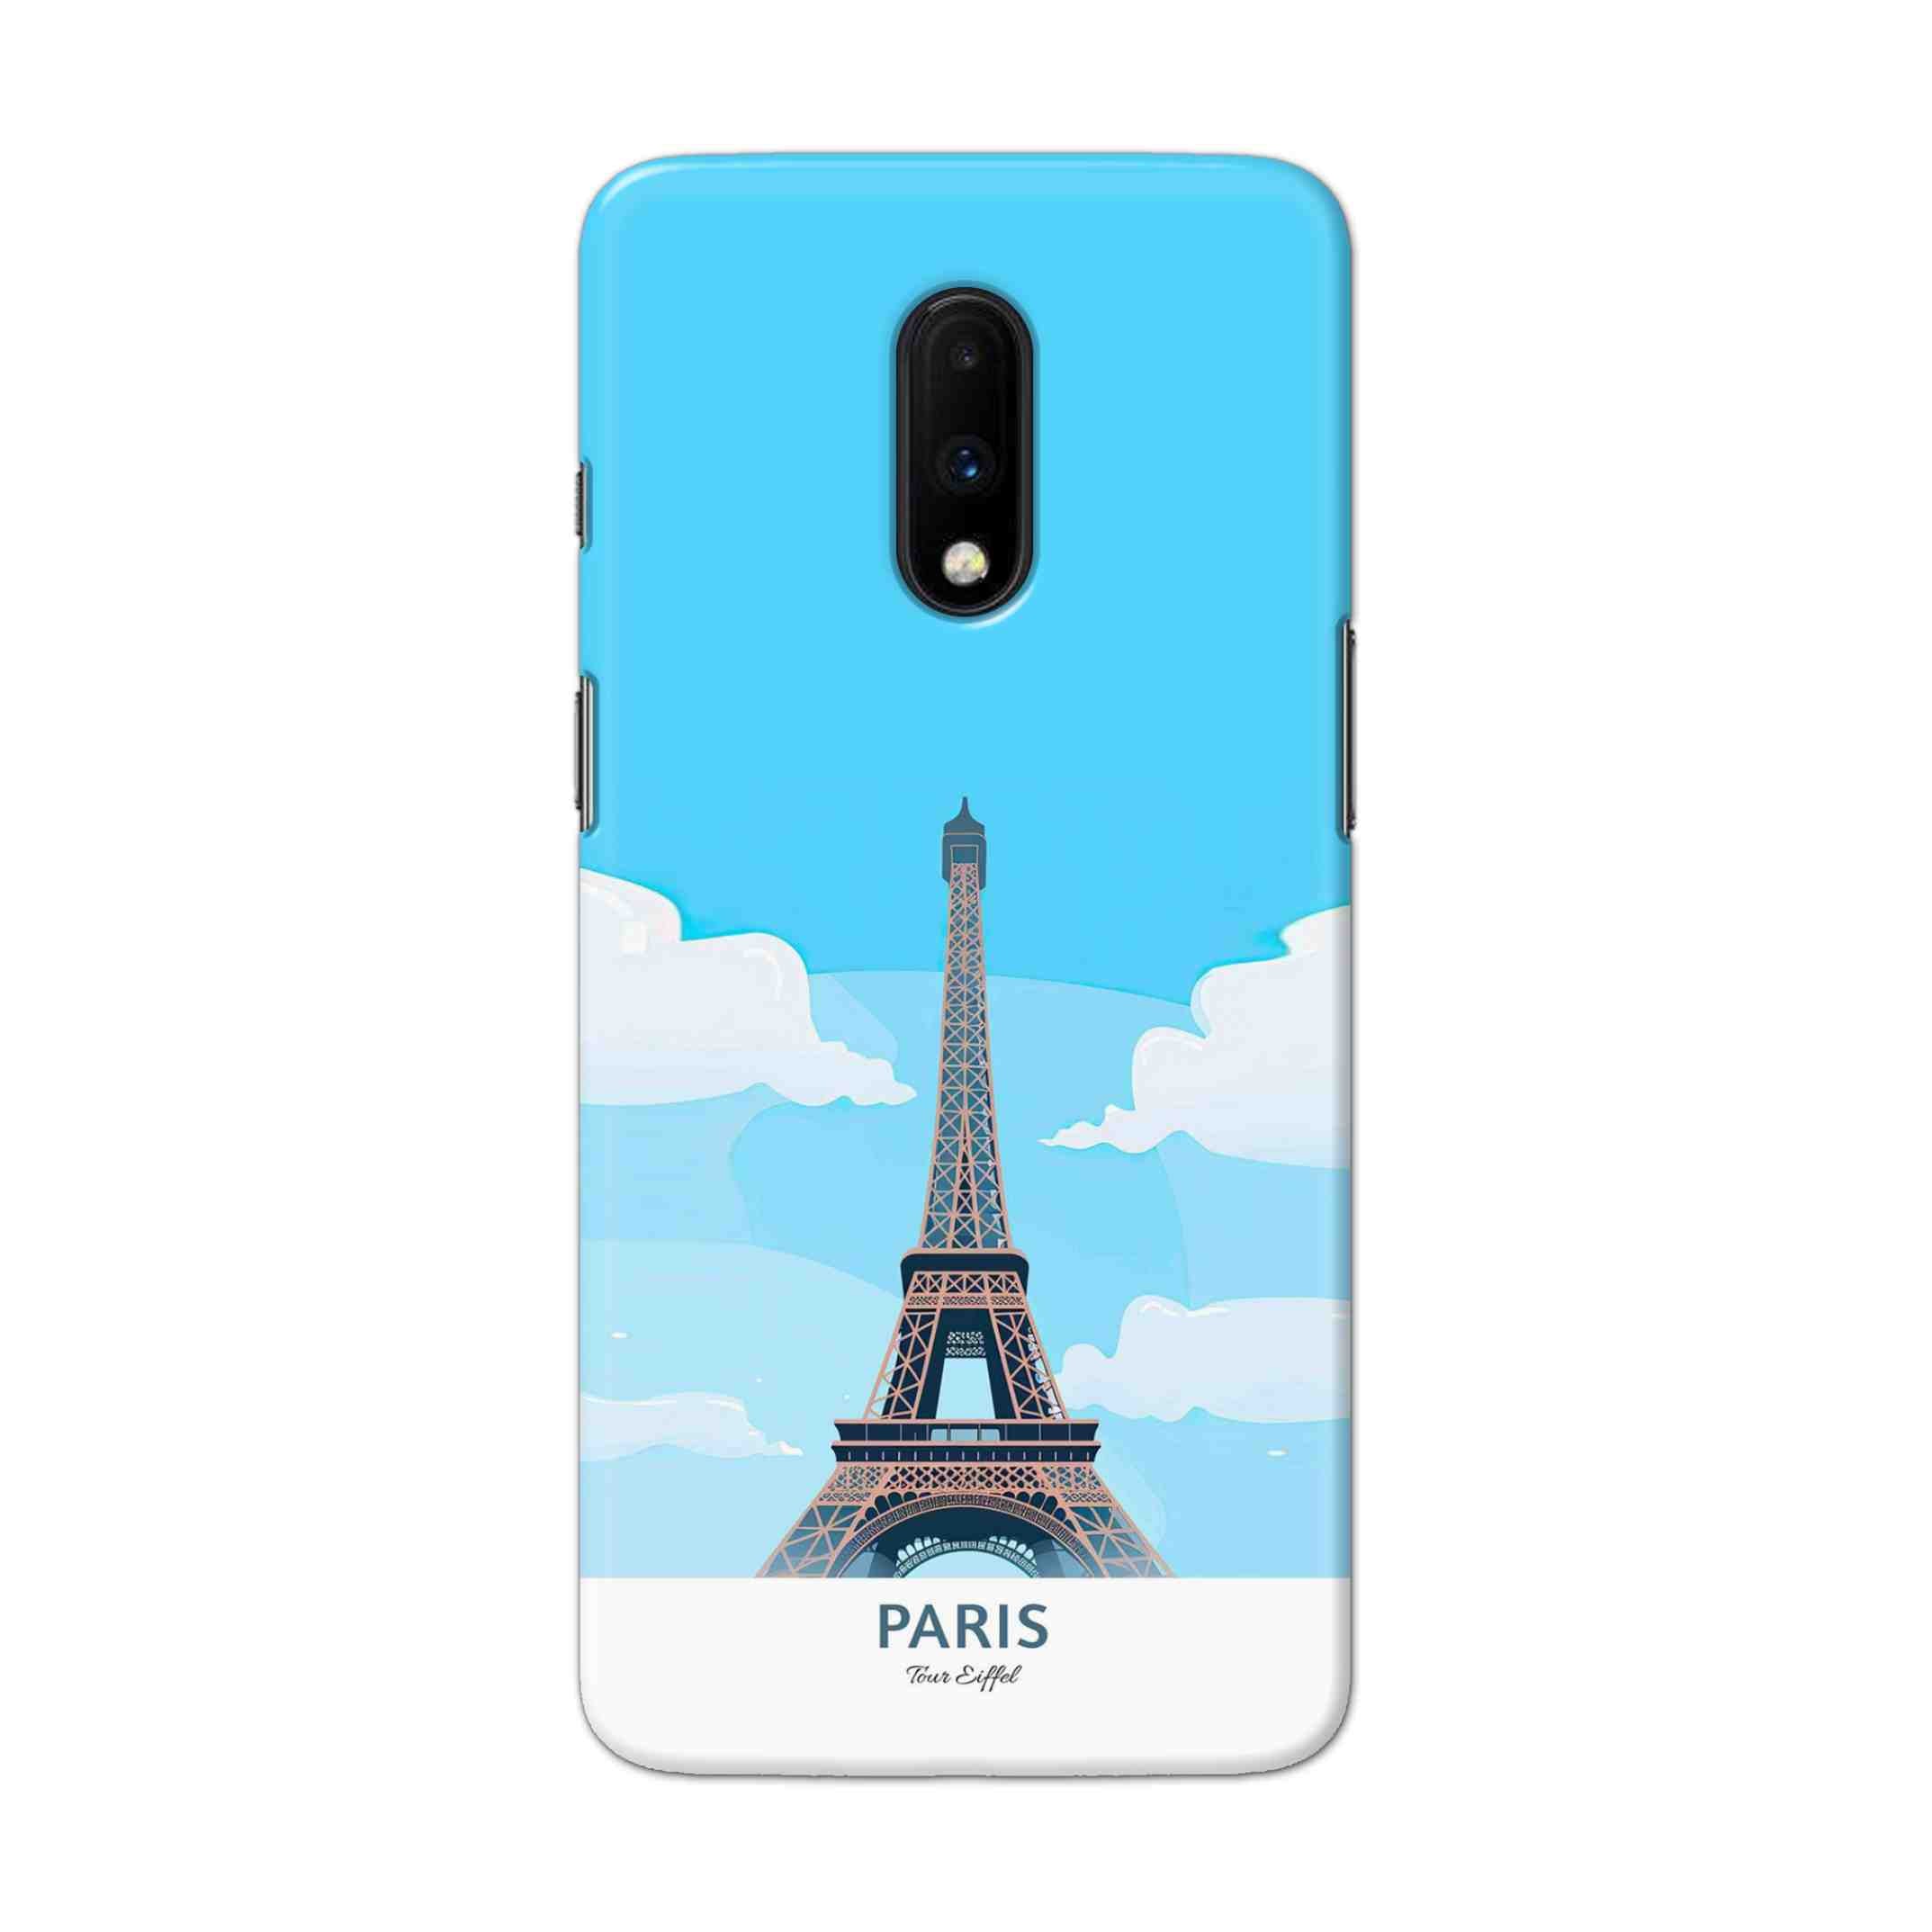 Buy Paris Hard Back Mobile Phone Case Cover For OnePlus 7 Online